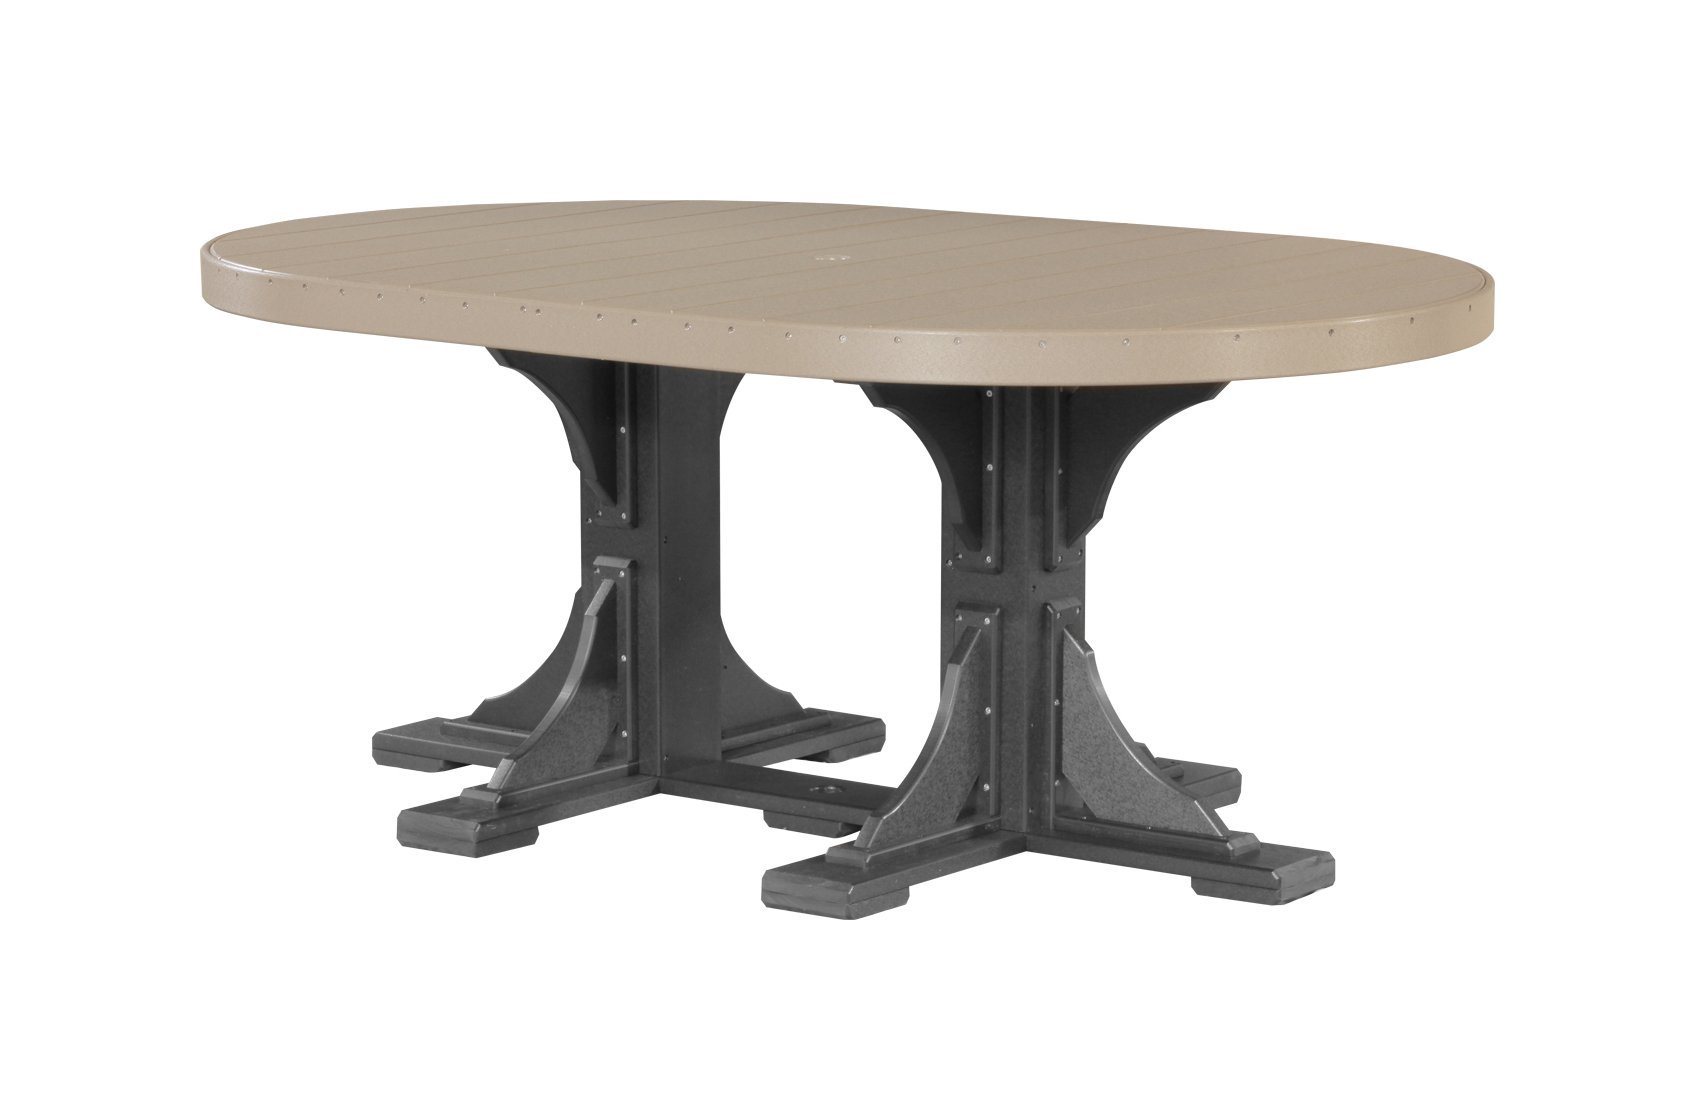 Luxcraft PolyTuf Oval Table